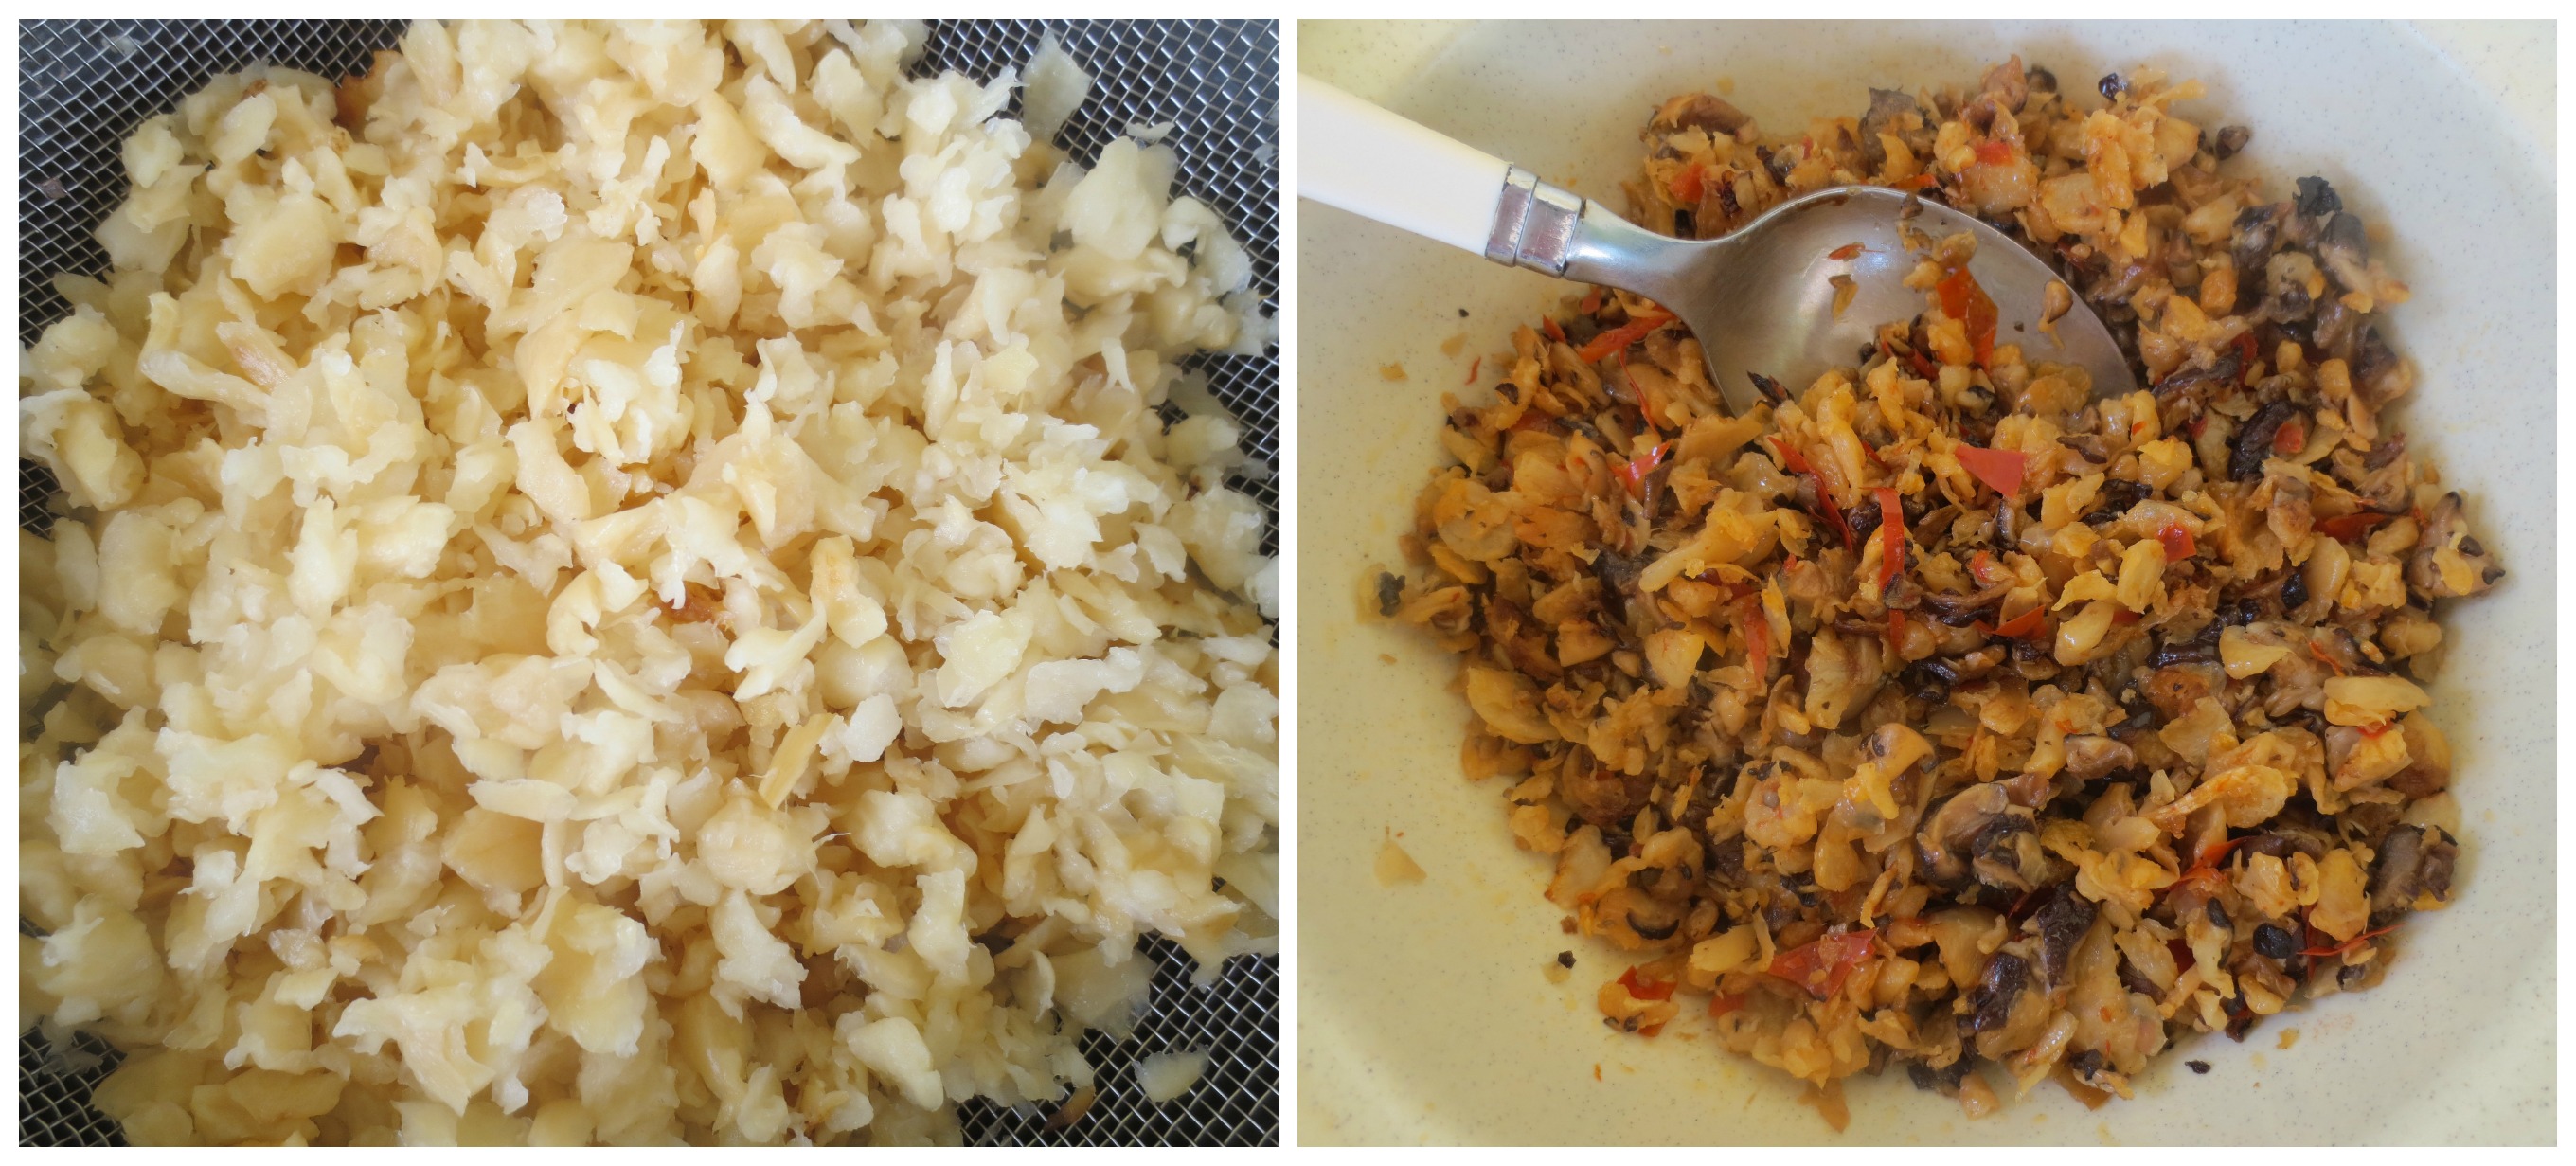 Left-Ready chopped Chai poh bought from market Right - Stir-fried chai poh and mushroom ready for topping